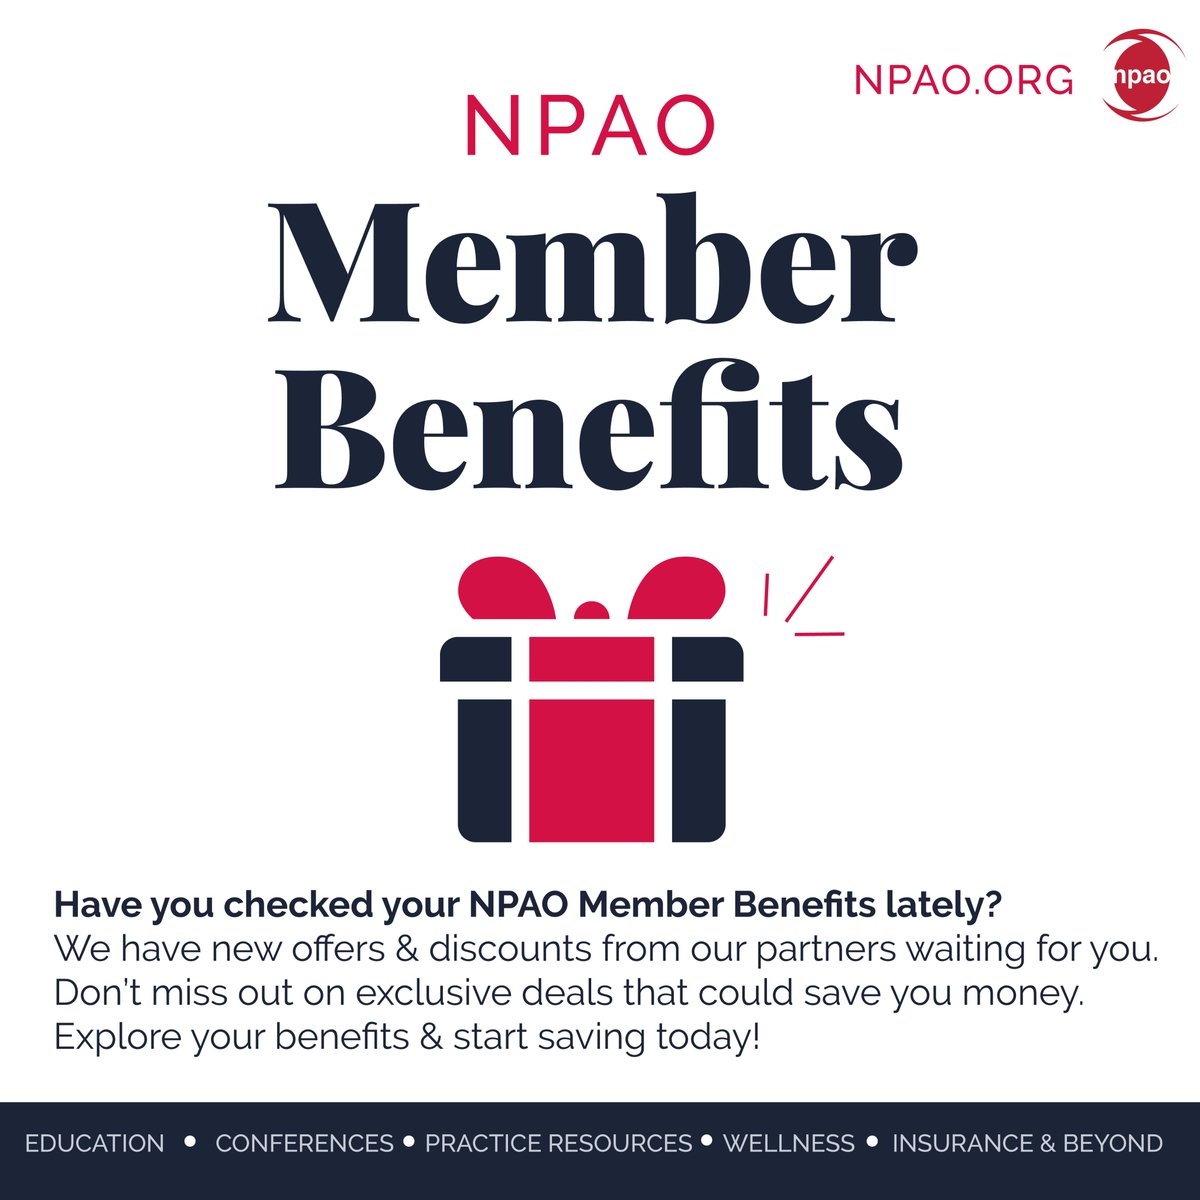 Have you checked your #NPAO Member Benefits lately? We have new offers & #discounts from our partners waiting for you! Don't miss out on exclusive deals that could save you money. Visit the link below to explore your #perks: npcentral.npao.org/site/member-be… #MemberBenefits #ExclusiveDeals